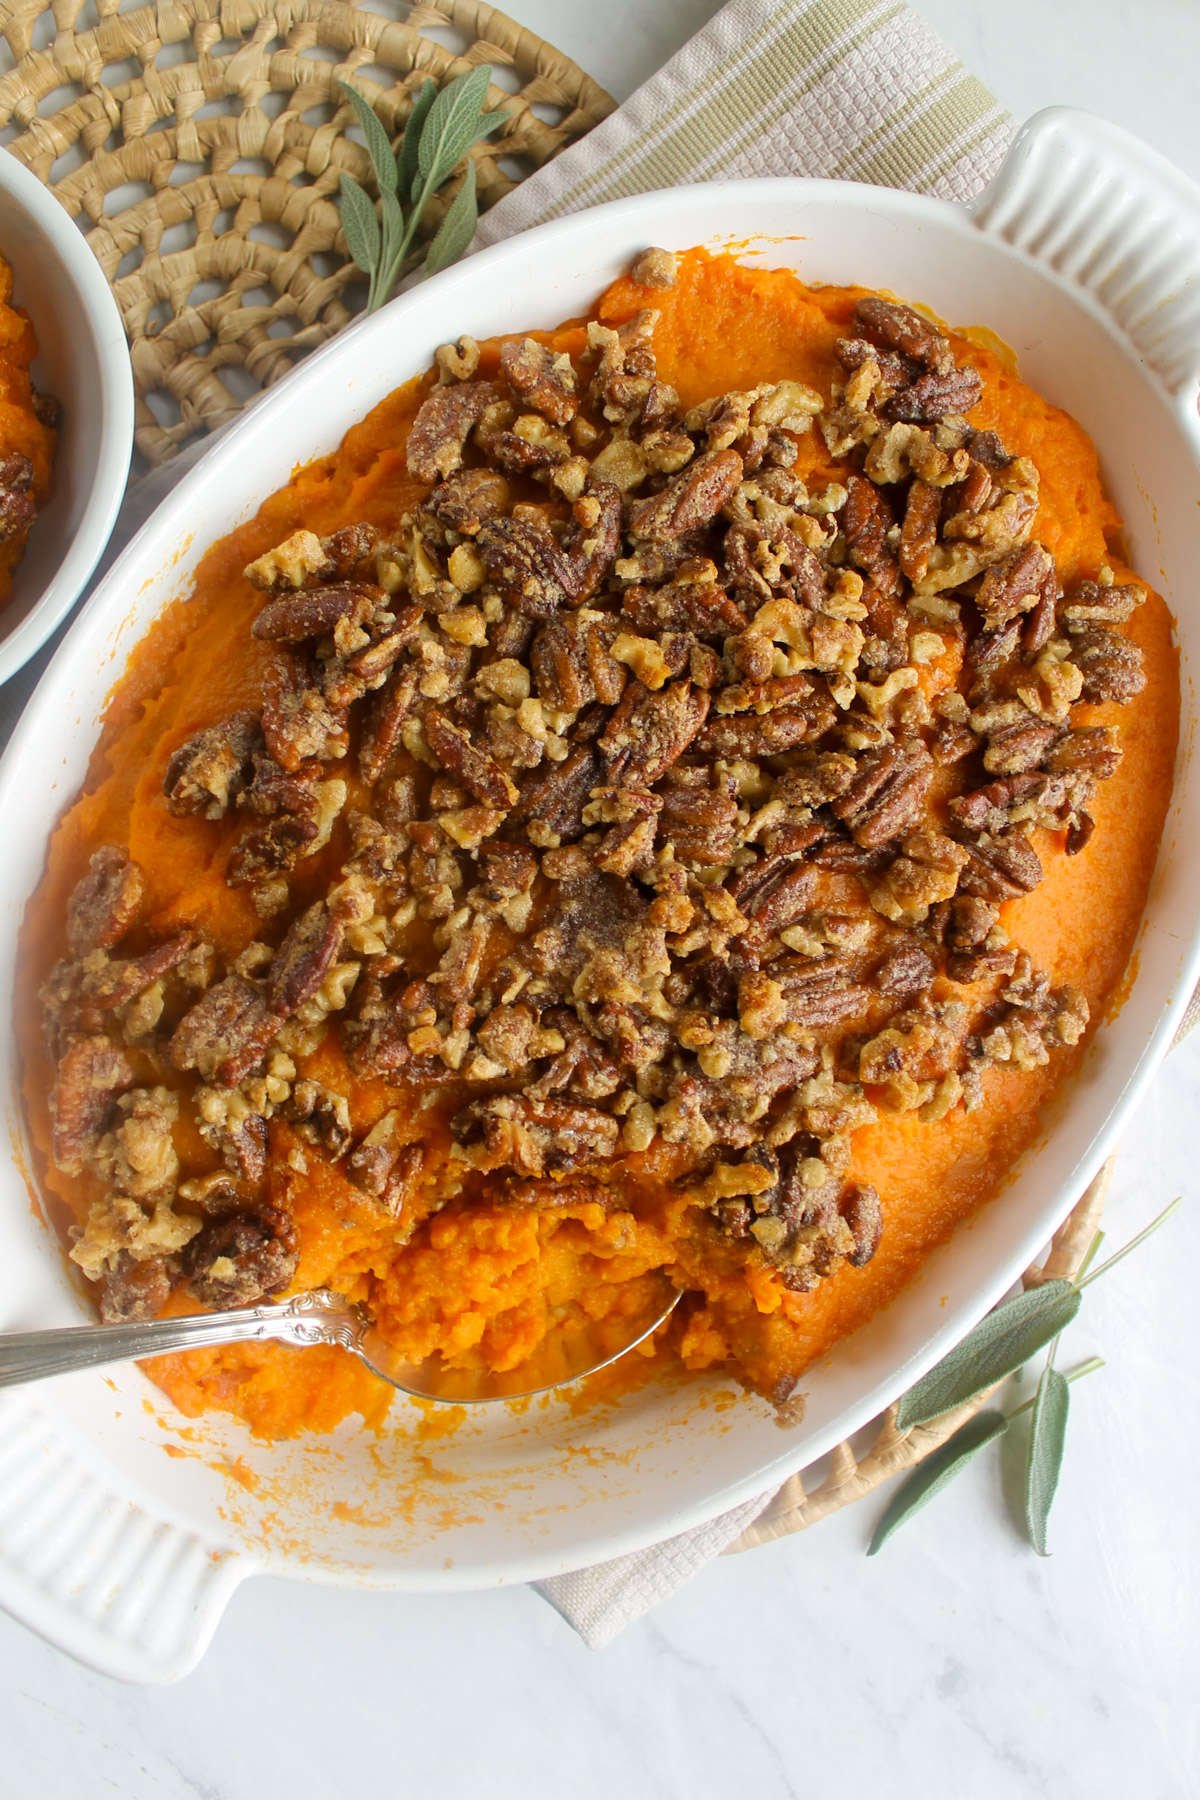 Sweet potato casserole with maple pecan topping in a white baking dish.